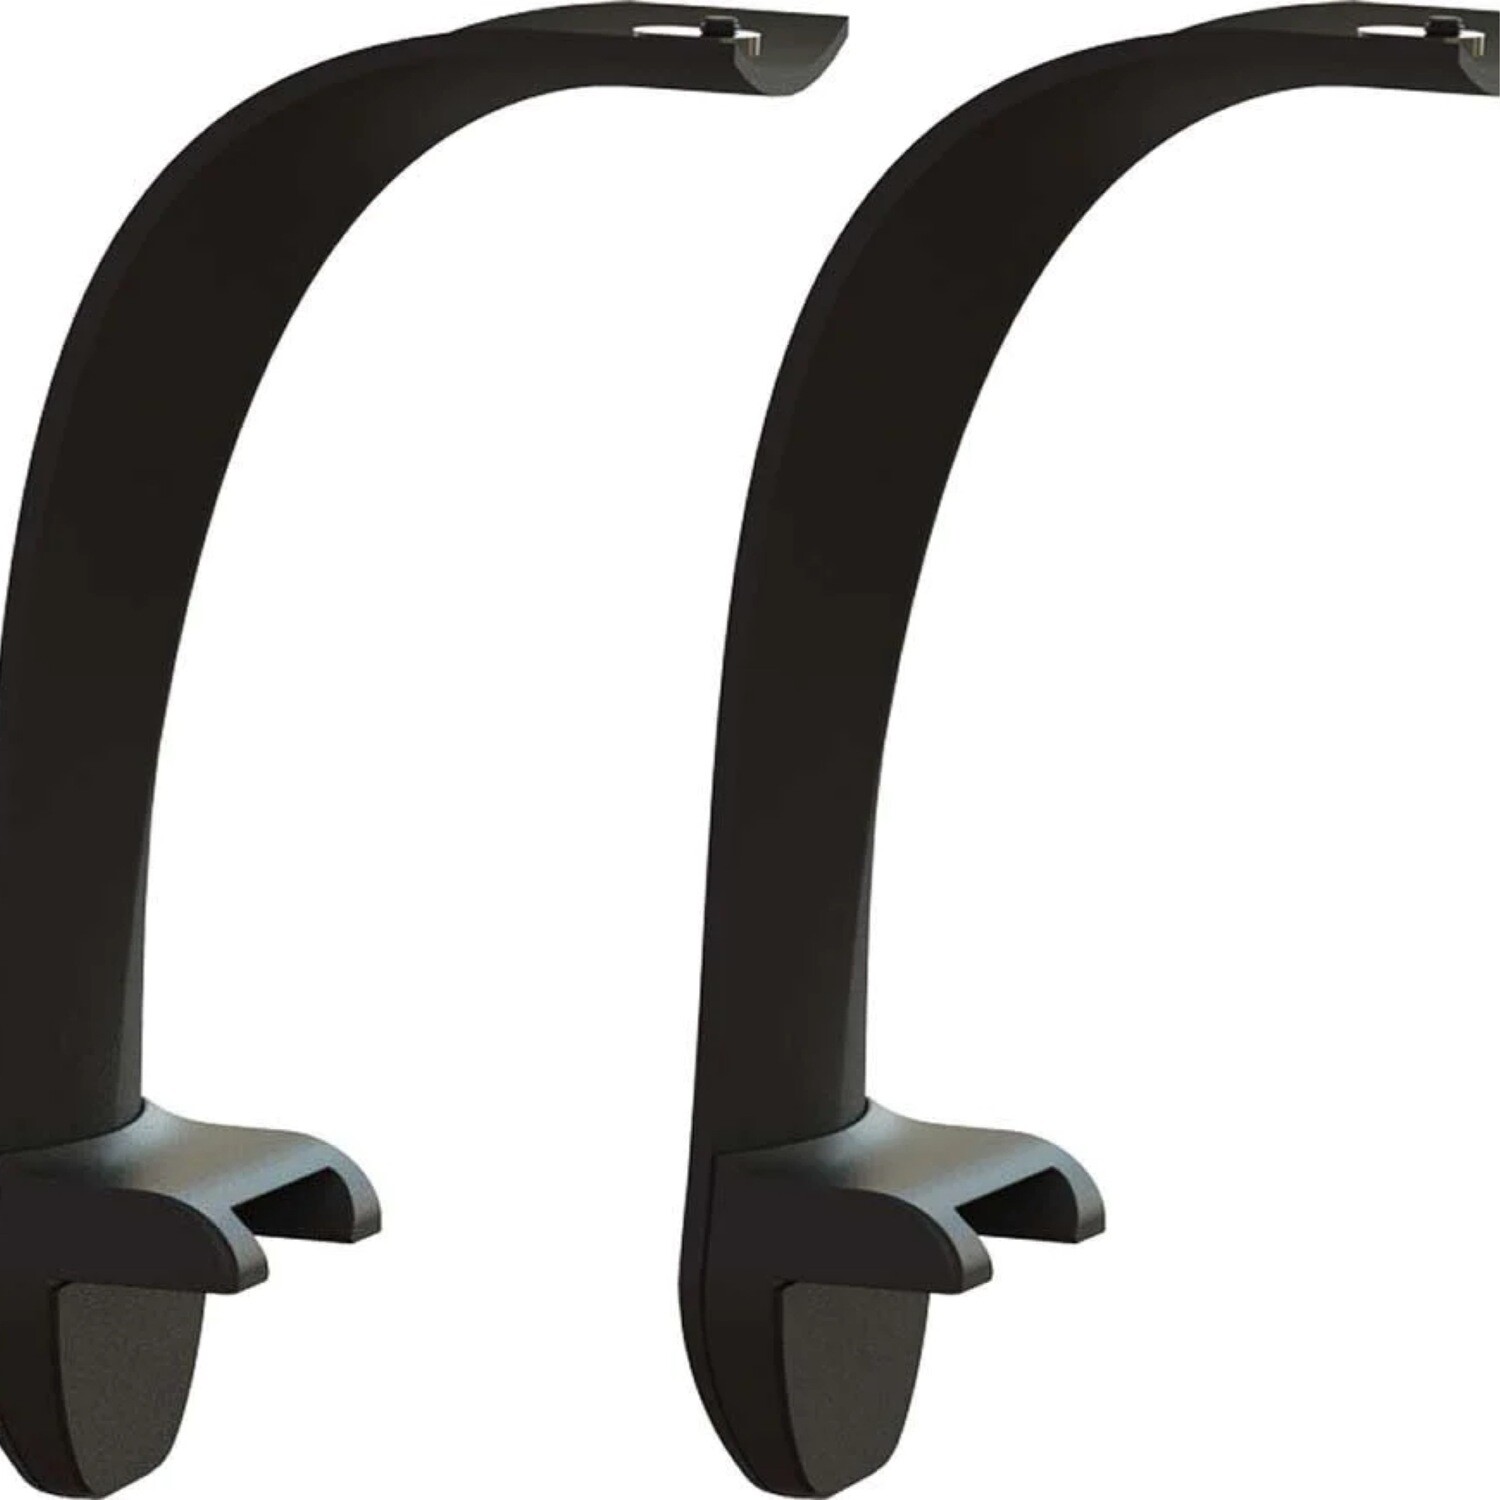 Ecotech Radion Mounting System RMS Arms (XR710)